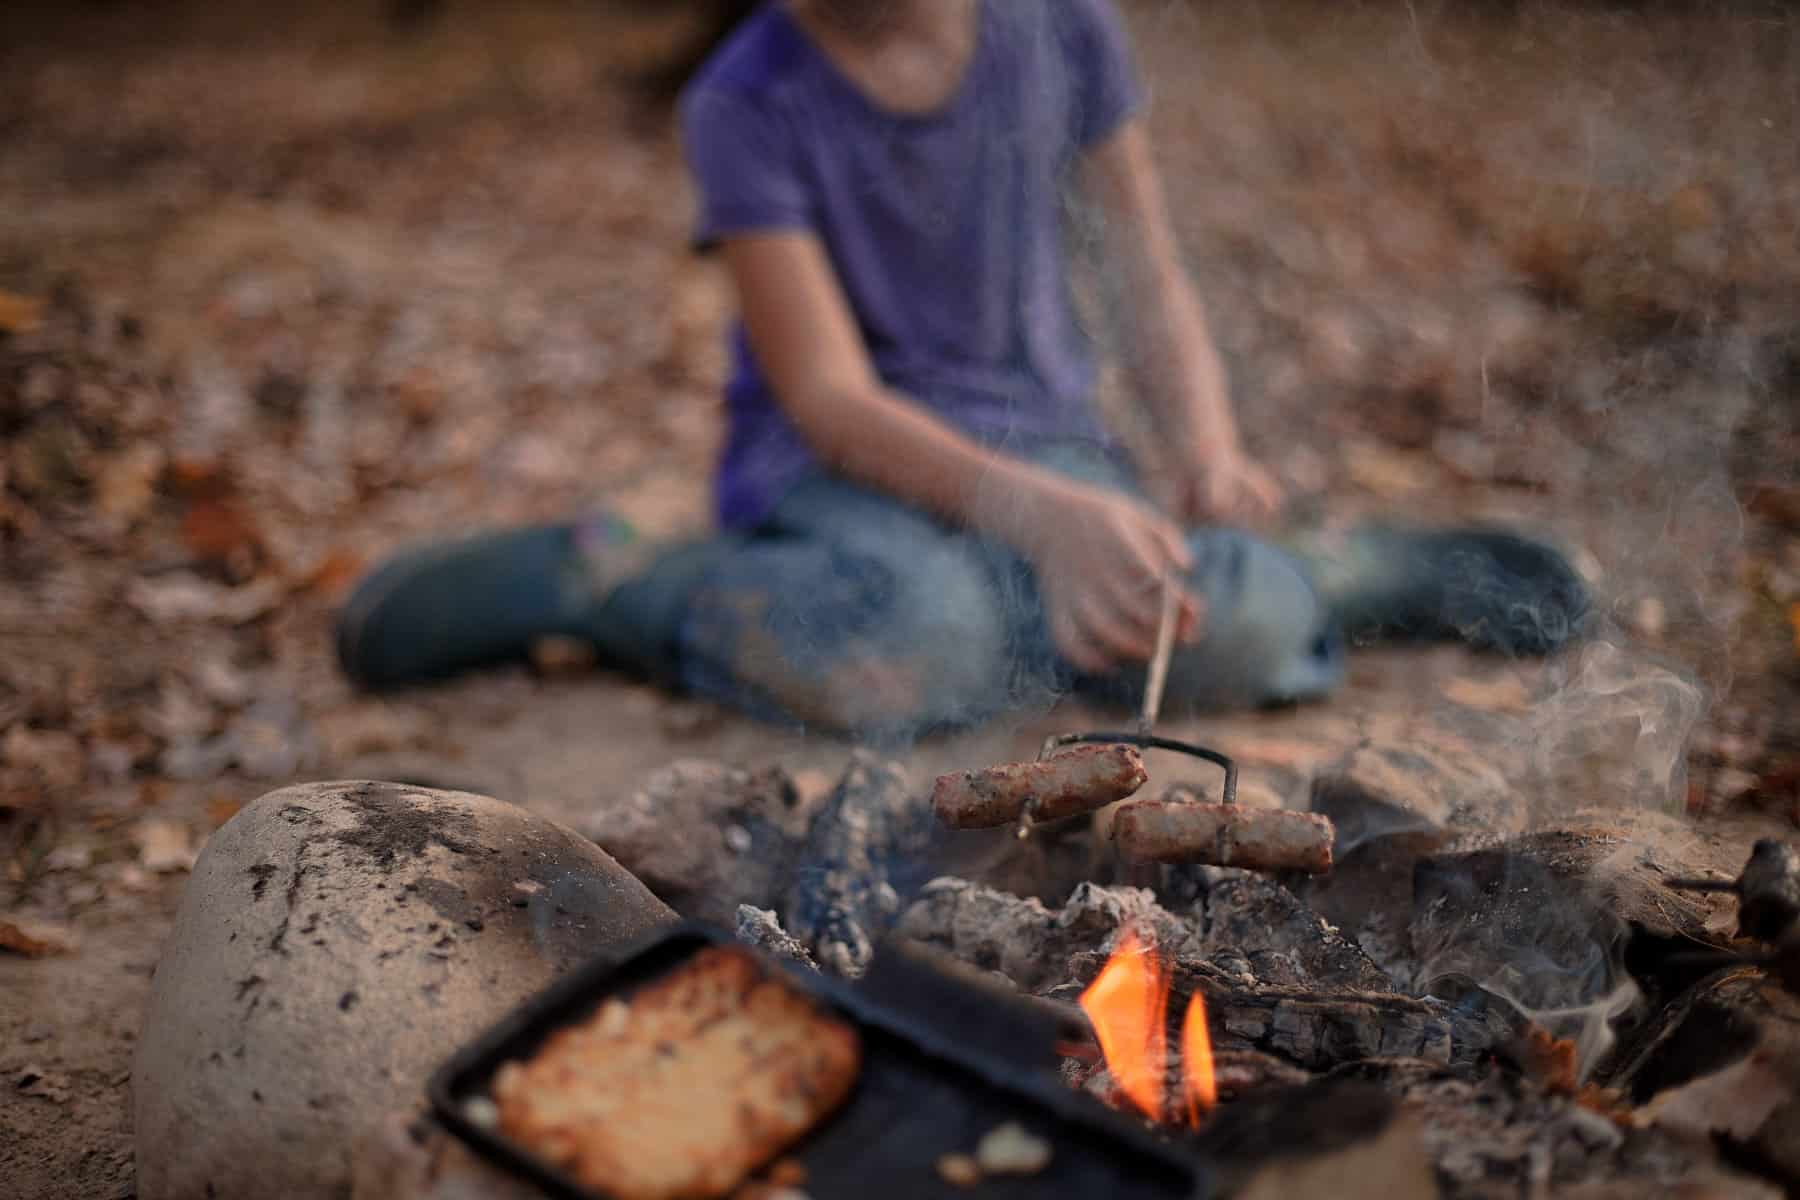 15 BEST Campfire Cooking Kits for Tasty Outdoor Meals [2023]